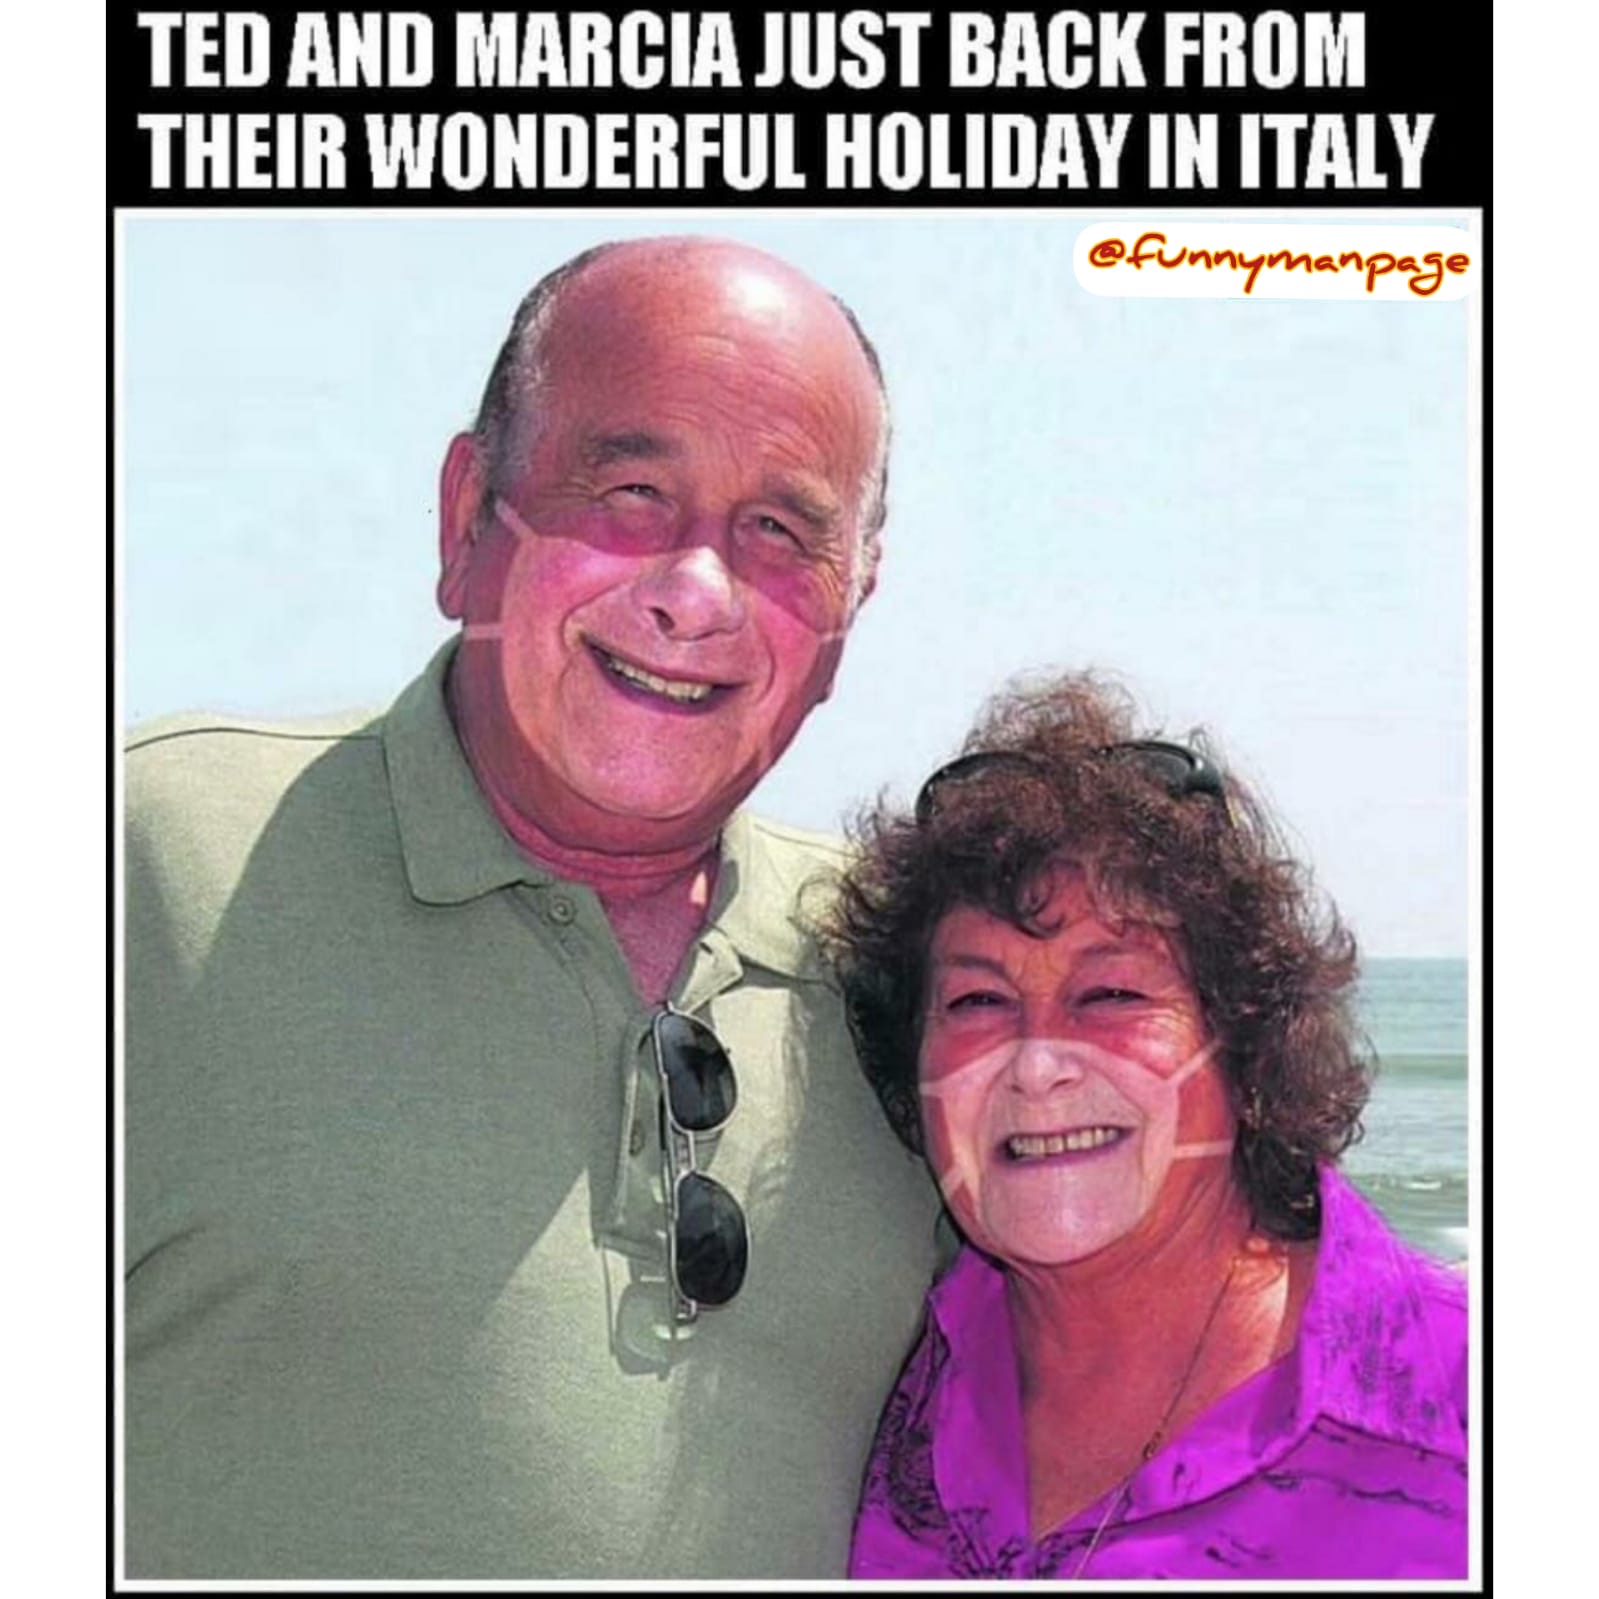 Ted and Marcia just got back from their wonderful holiday in Italy